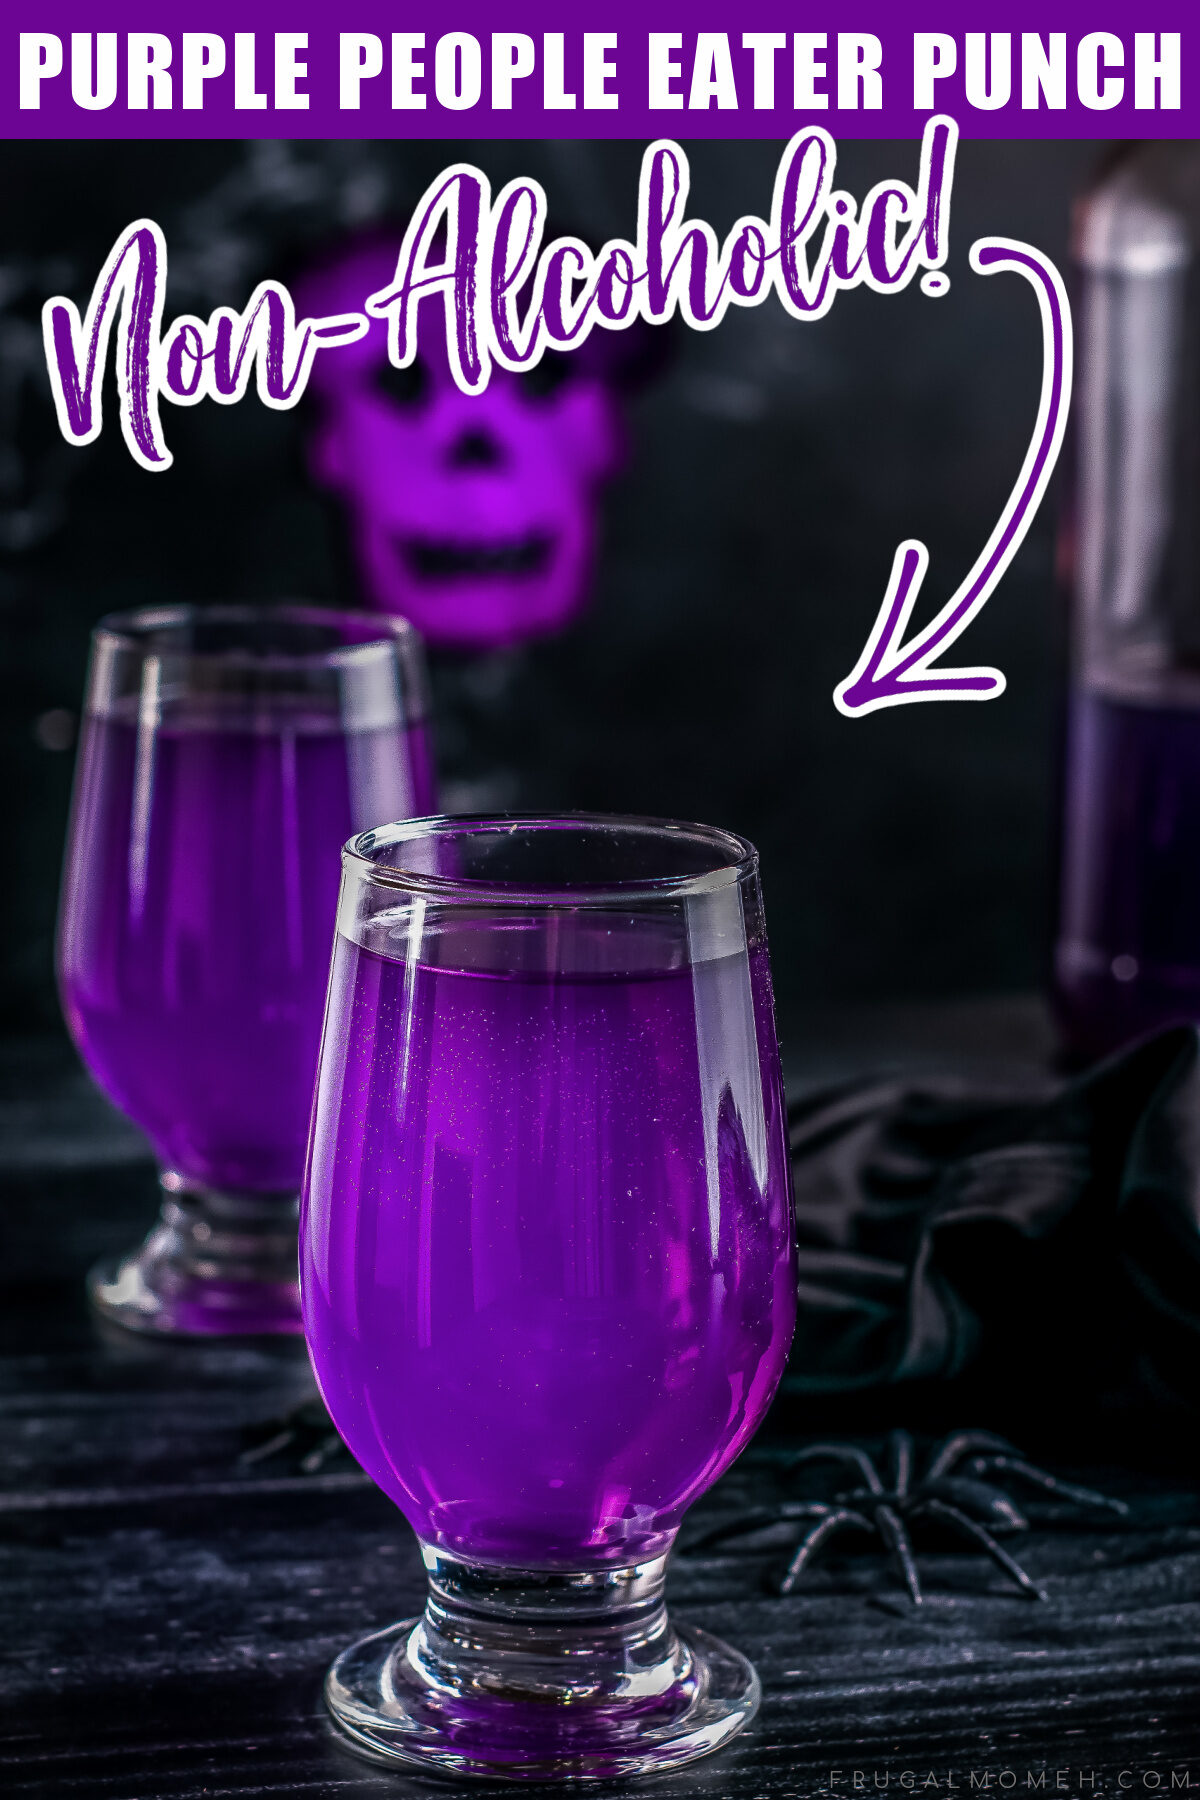 Purple People Eater Halloween Punch is a fun and easy non-alcoholic punch recipe that kids will love for this year's Halloween party.